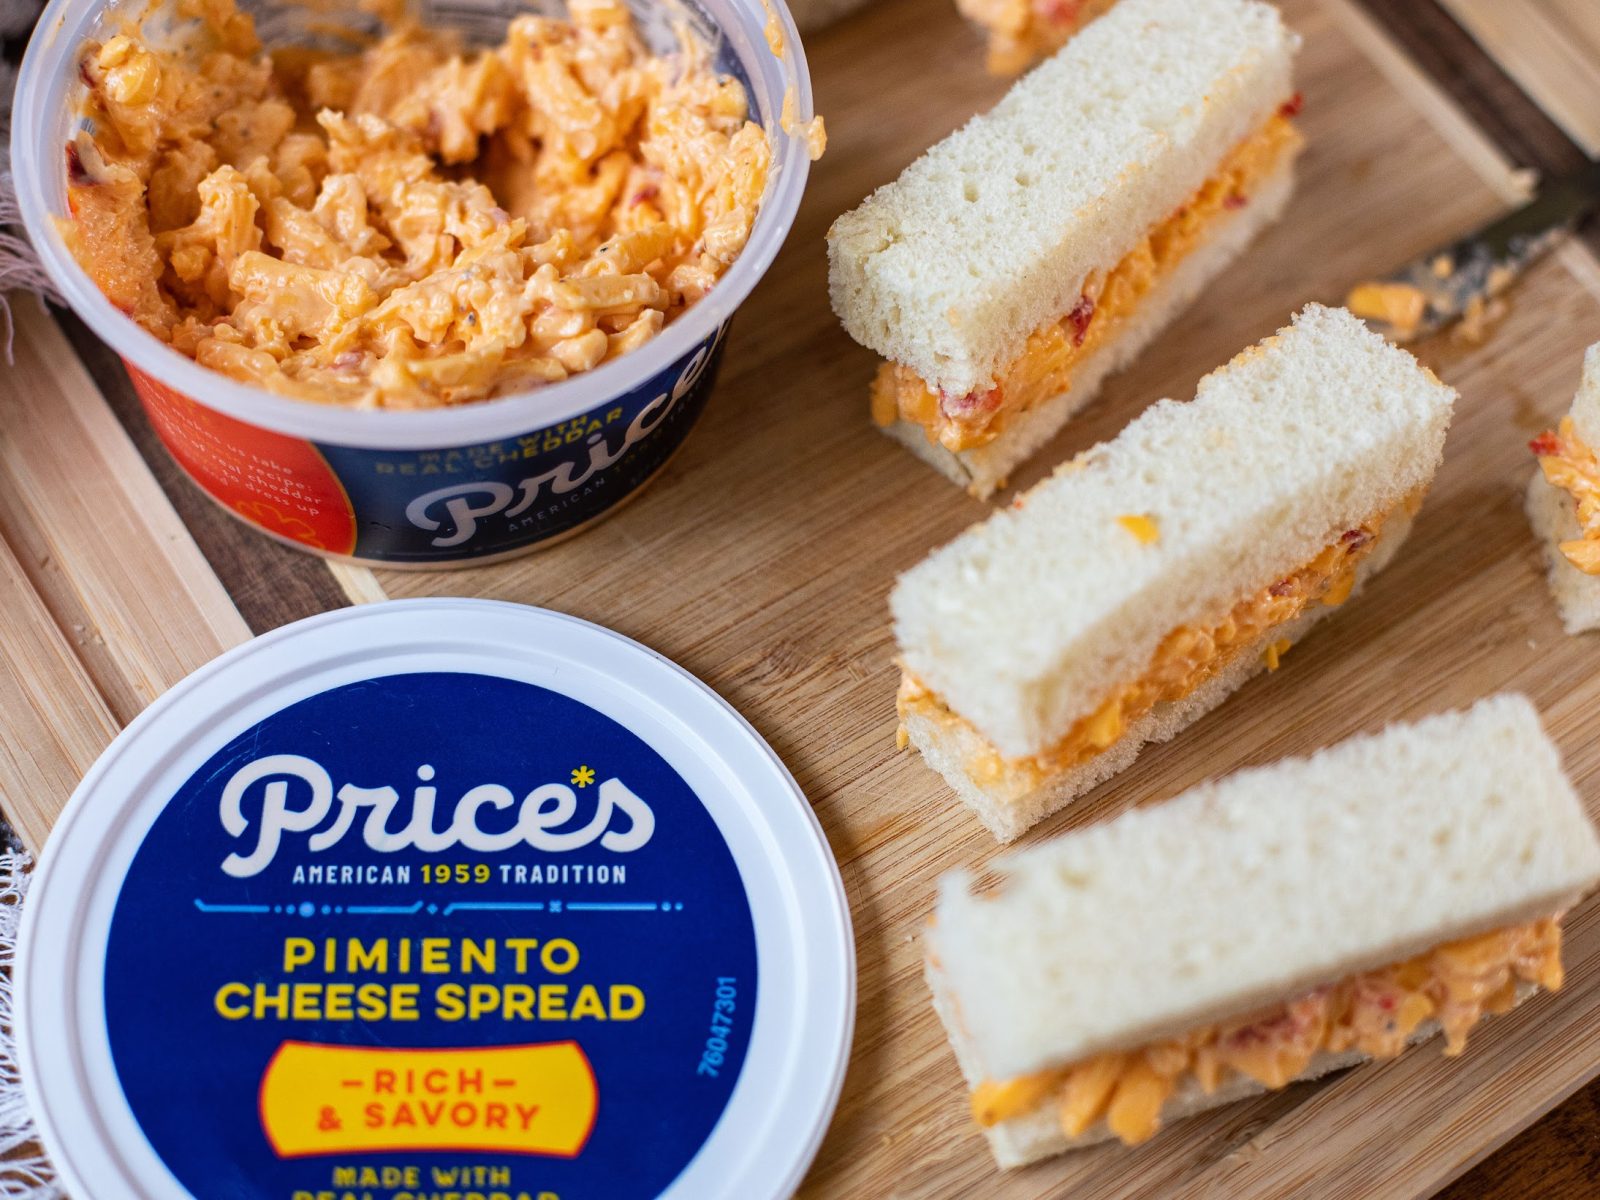 Pick Up Price*s Pimiento Cheese At Your Local Publix – New Look, Same Great Flavor!